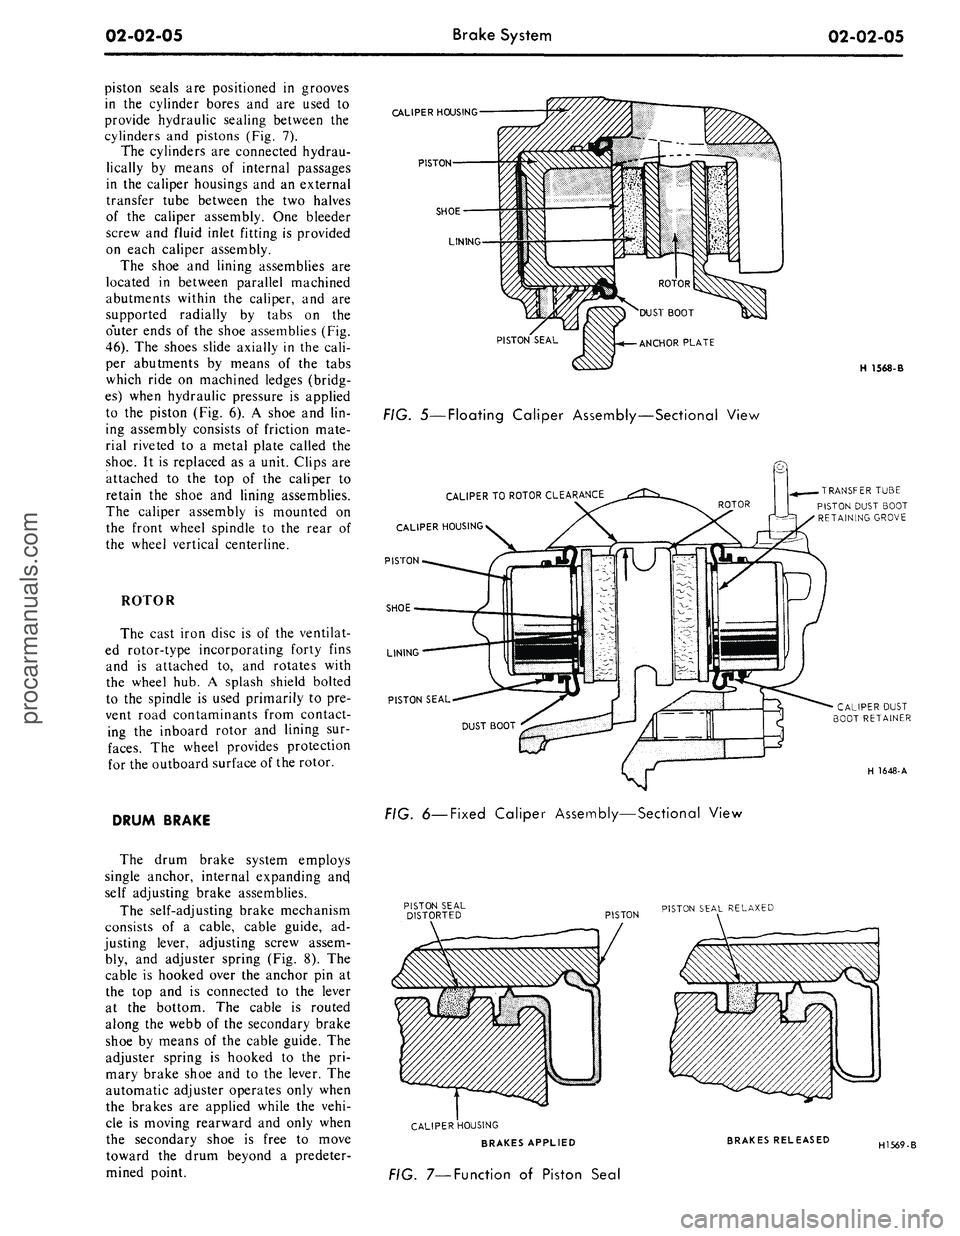 FORD MUSTANG 1969  Volume One Chassis 
02-02-05 
Brake System

02-02-05

piston seals are positioned in grooves

in the cylinder bores and are used to

provide hydraulic sealing between the

cylinders and pistons (Fig. 7).

The cylinders 